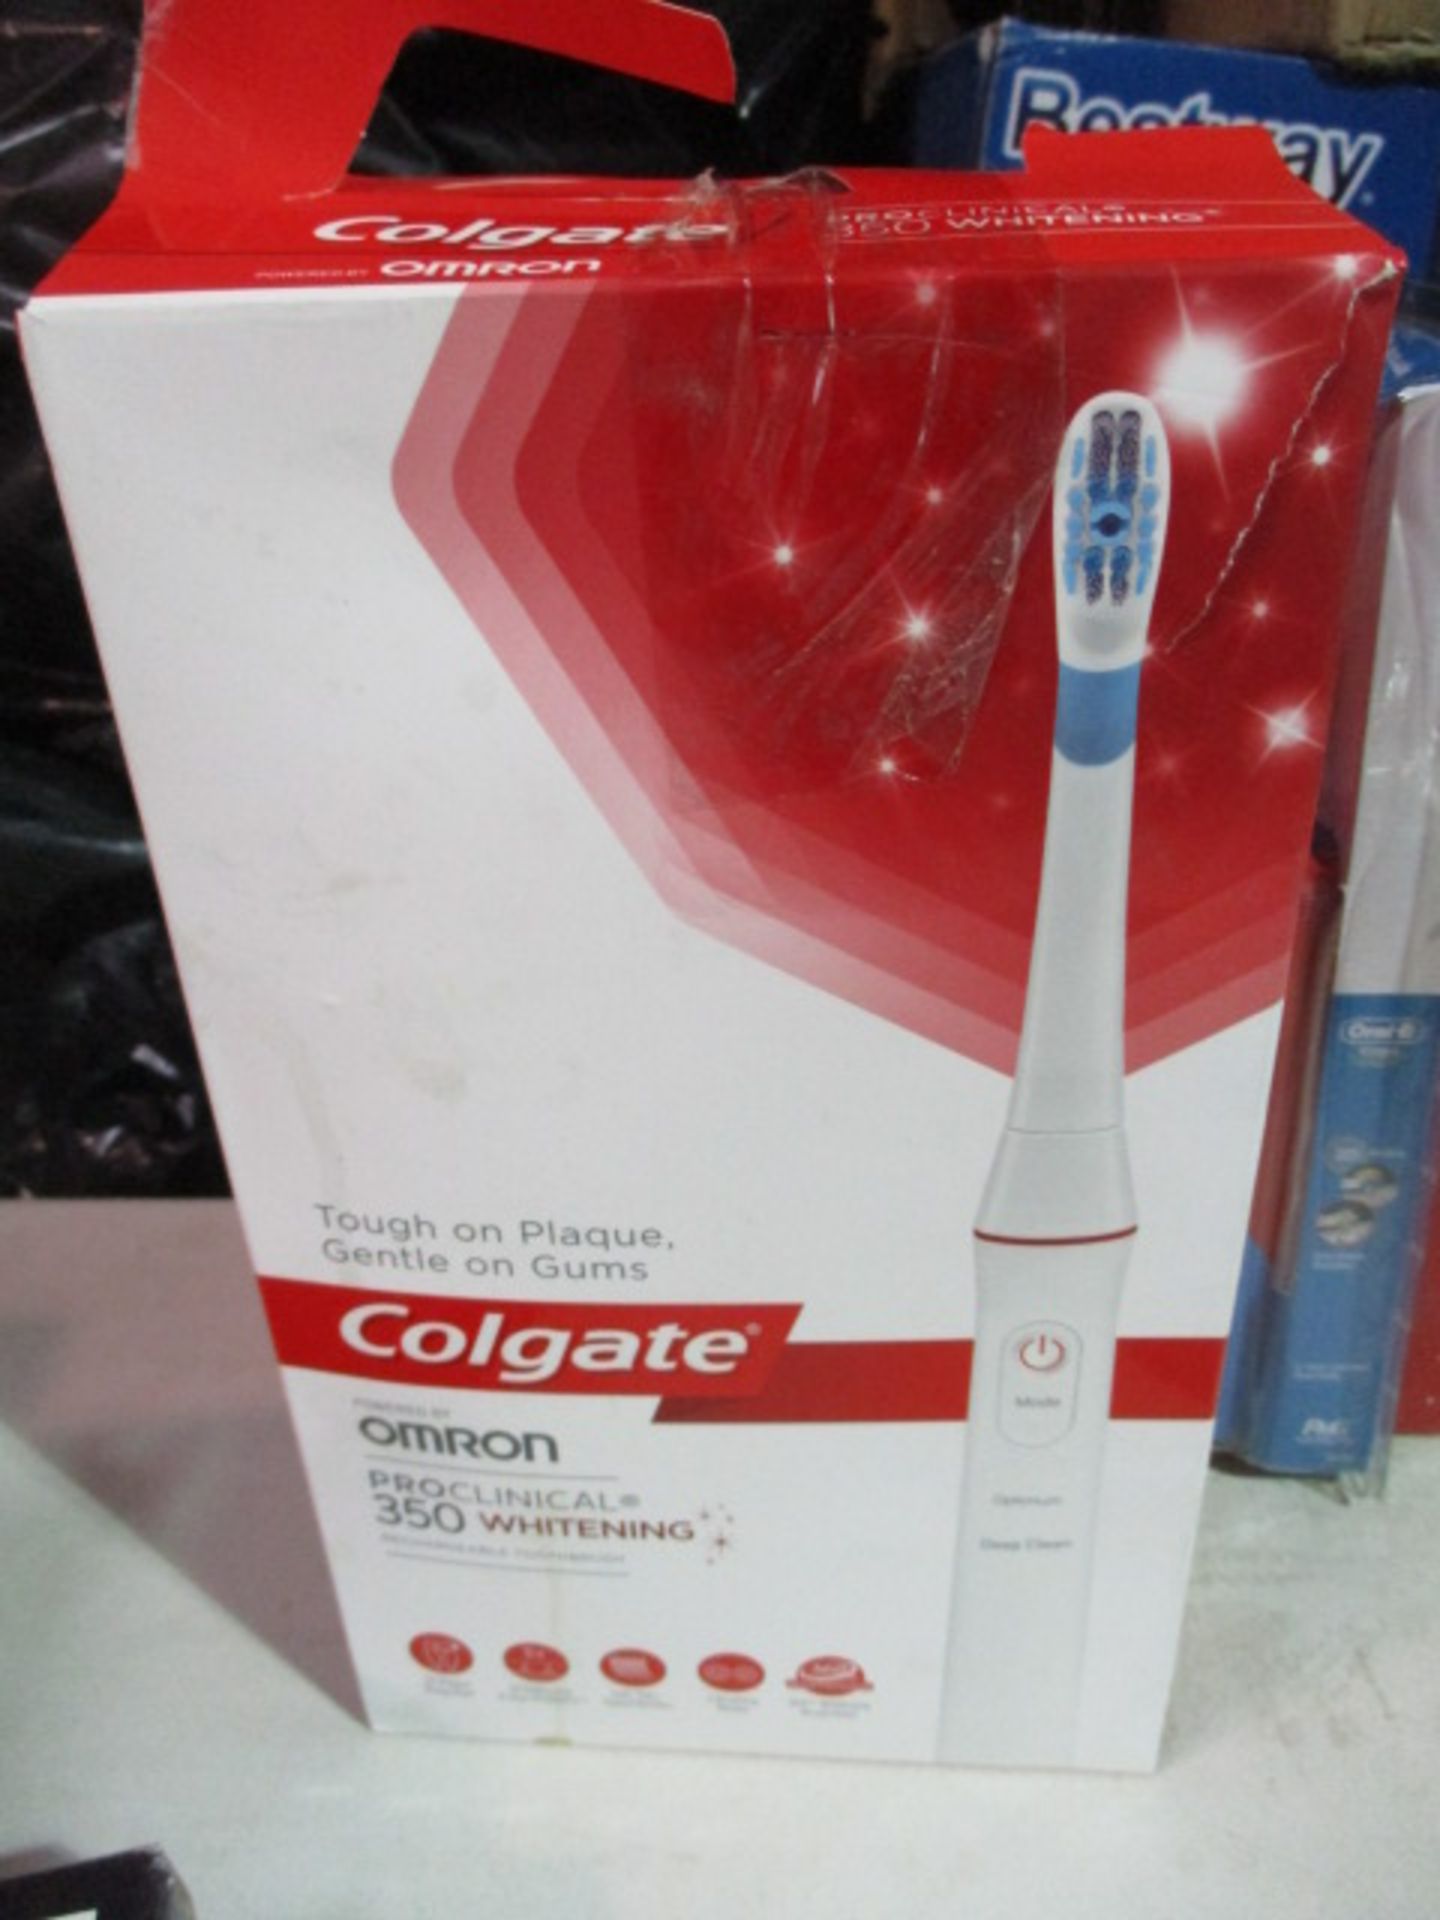 Colgate Omrom 350 Pro cleaning cordless toothbrush